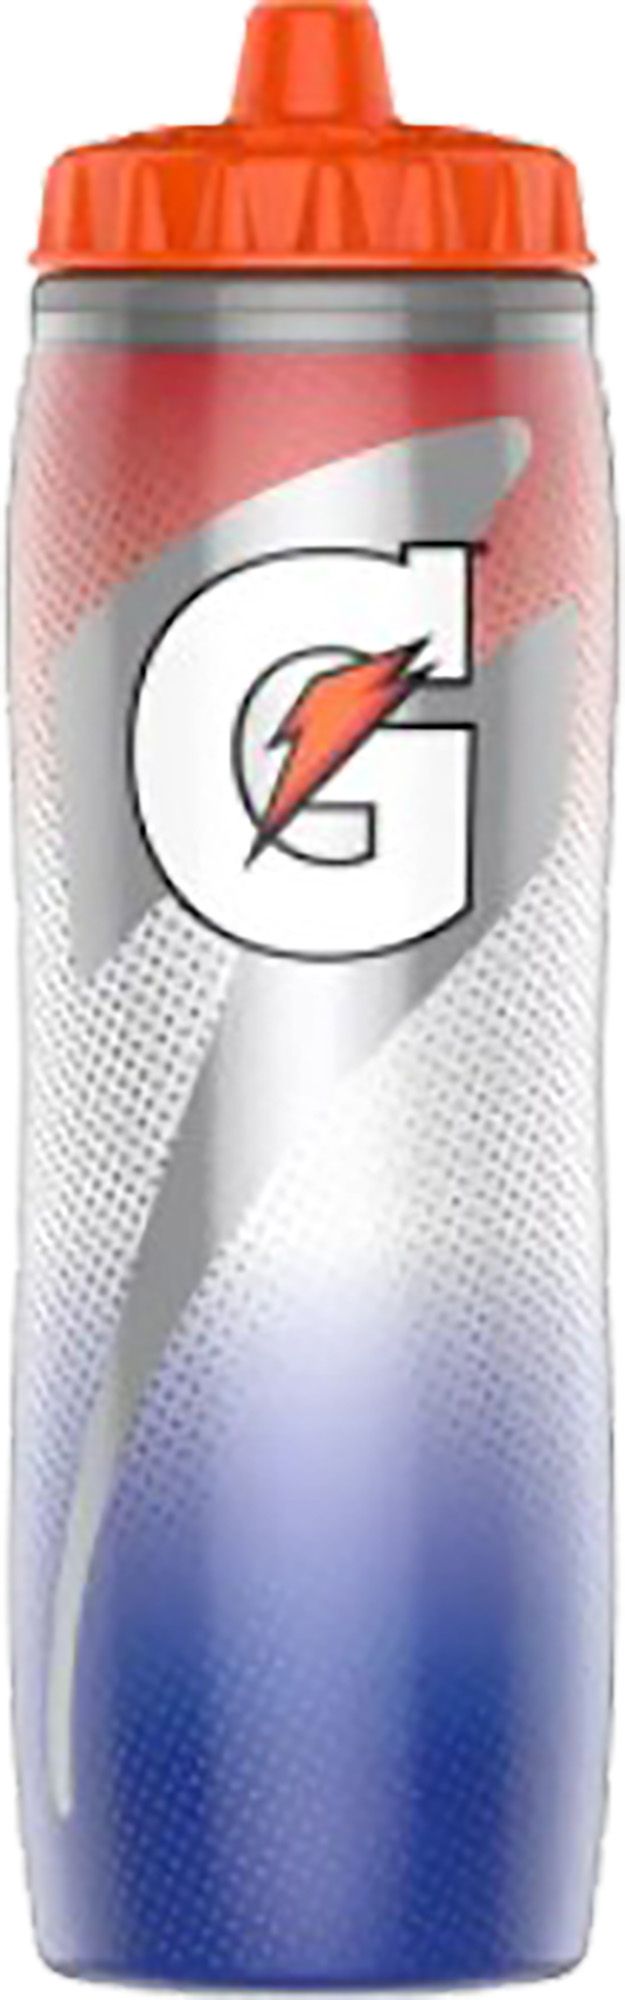  Gatorade Premium Sideline Towel Bi-Color, White, Small & BlenderBottle  Shaker Bottle, BPA Free, Great for Pre Workout and Protein Shakes, 28 Ounce  : ספורט ופעילות בחיק הטבע